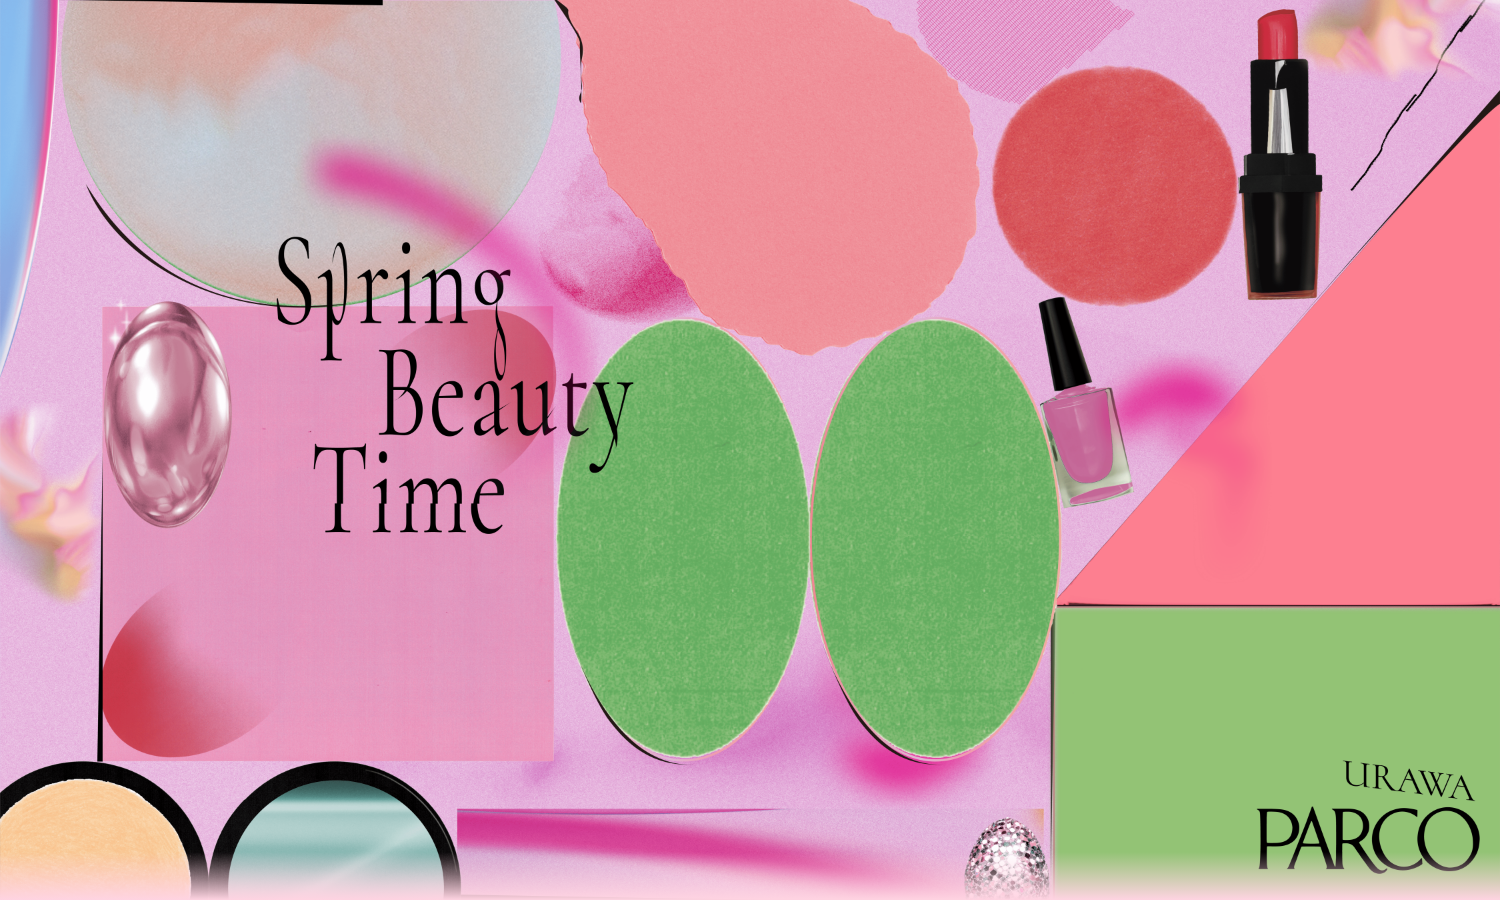 Spring Beauty Time｜浦和PARCO